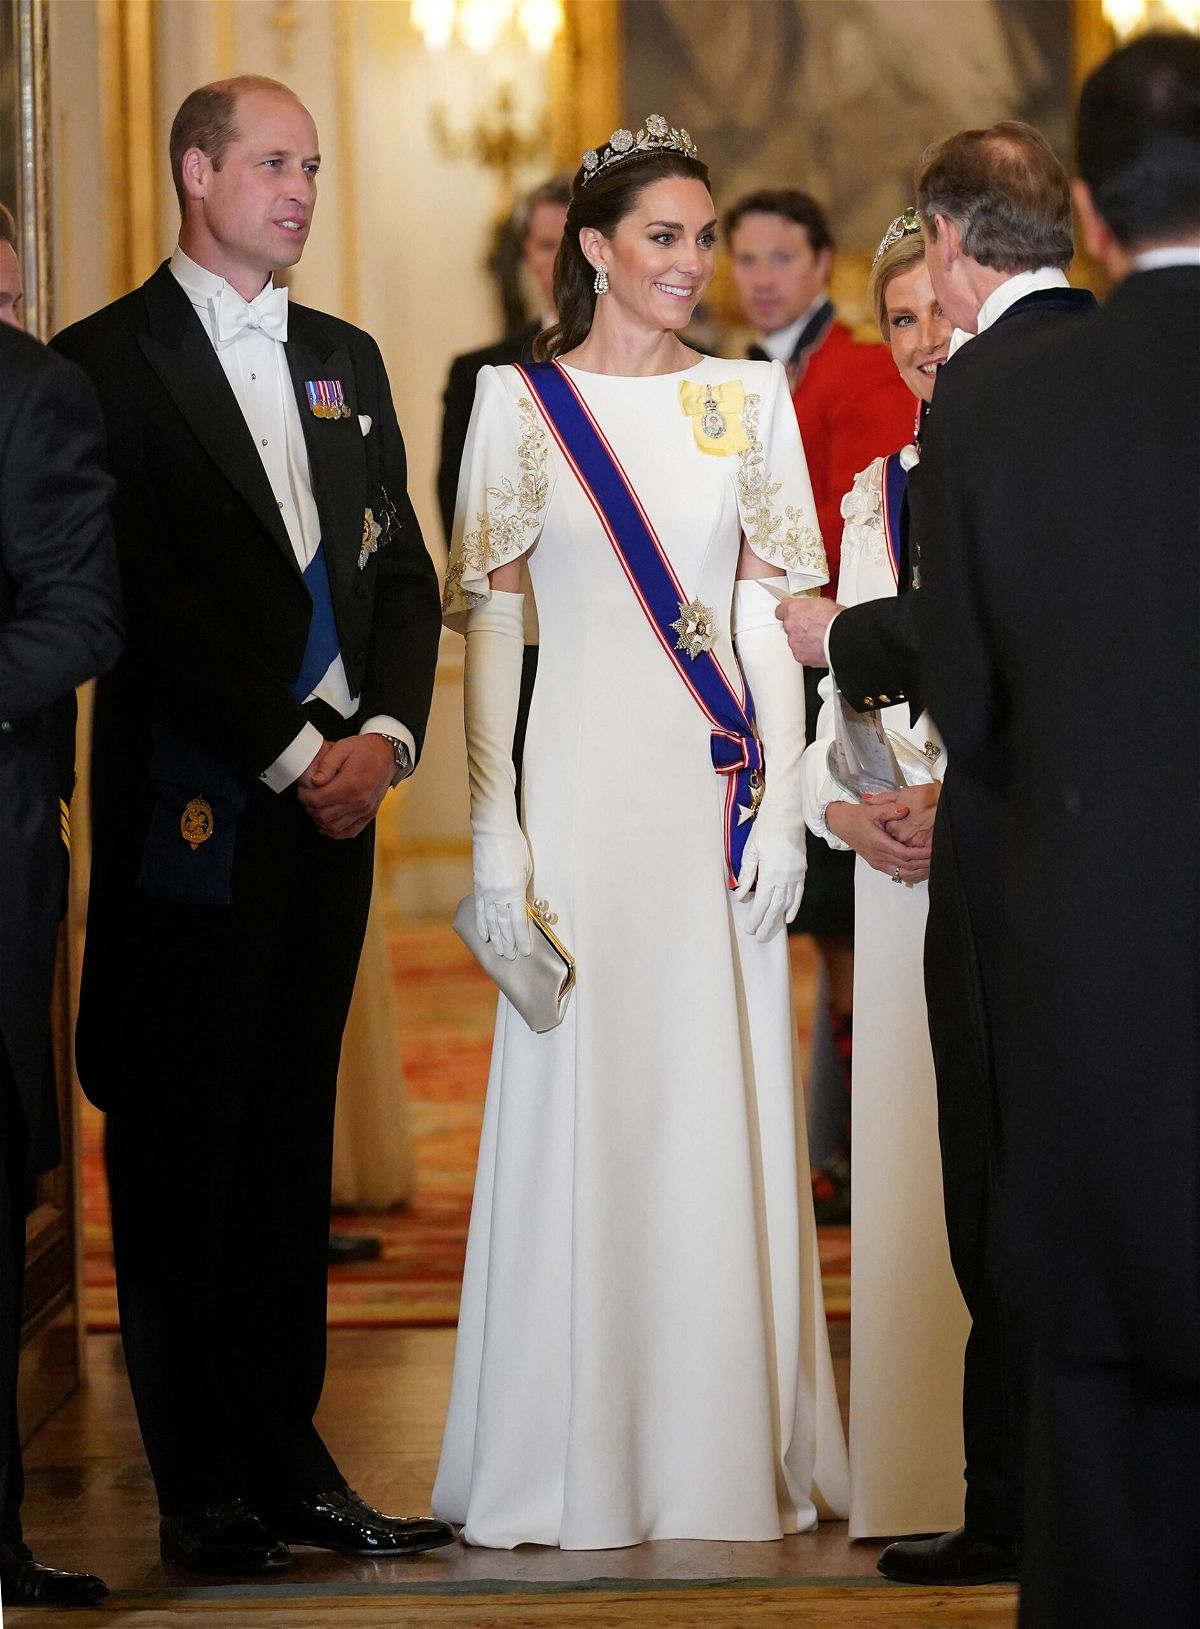 <i>Yui Mok/Reuters via CNN Newsource</i><br/>The Princess of Wales is pictured at the state banquet on November 21